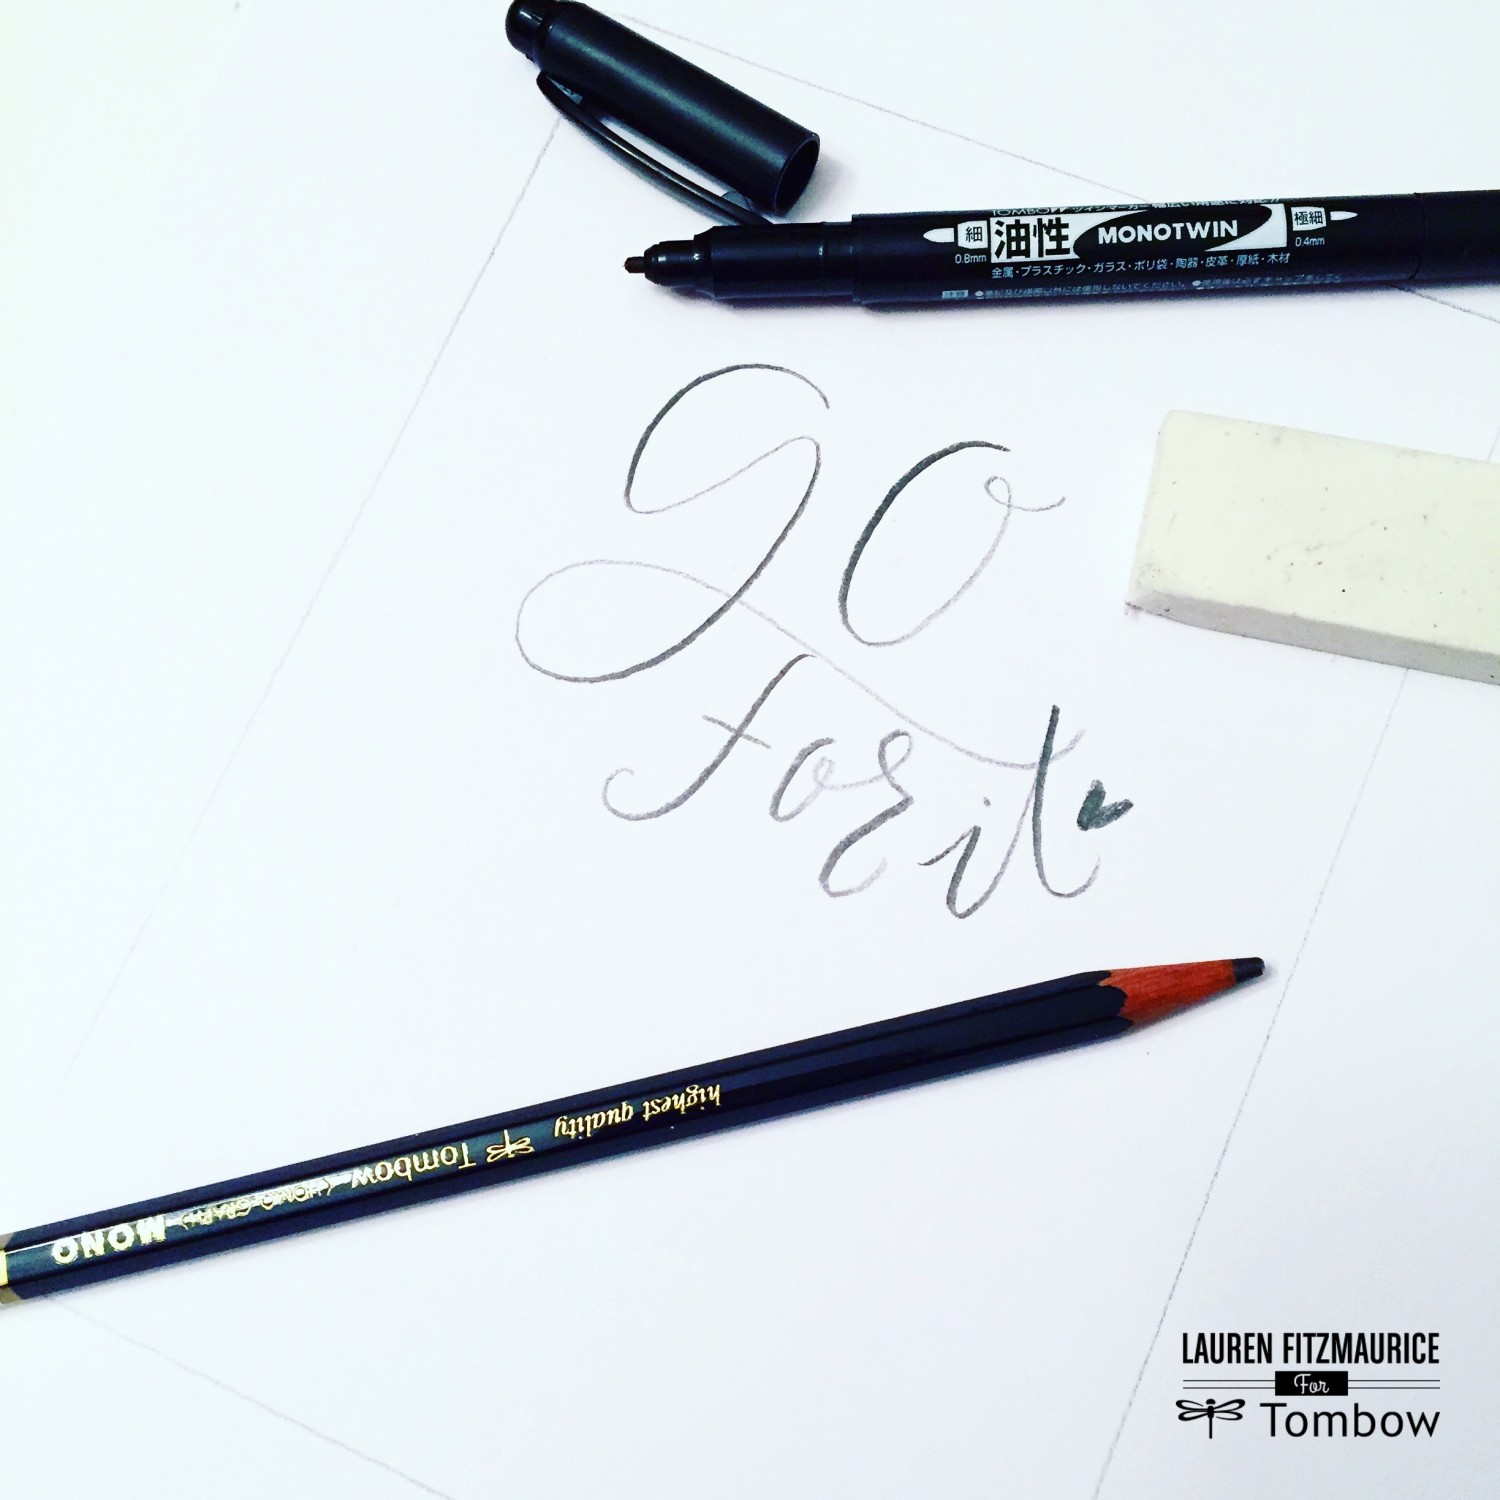 Top 10 tools every letterer needs: Tombow MONO Twin & Tombow MONO Drawing Pencil